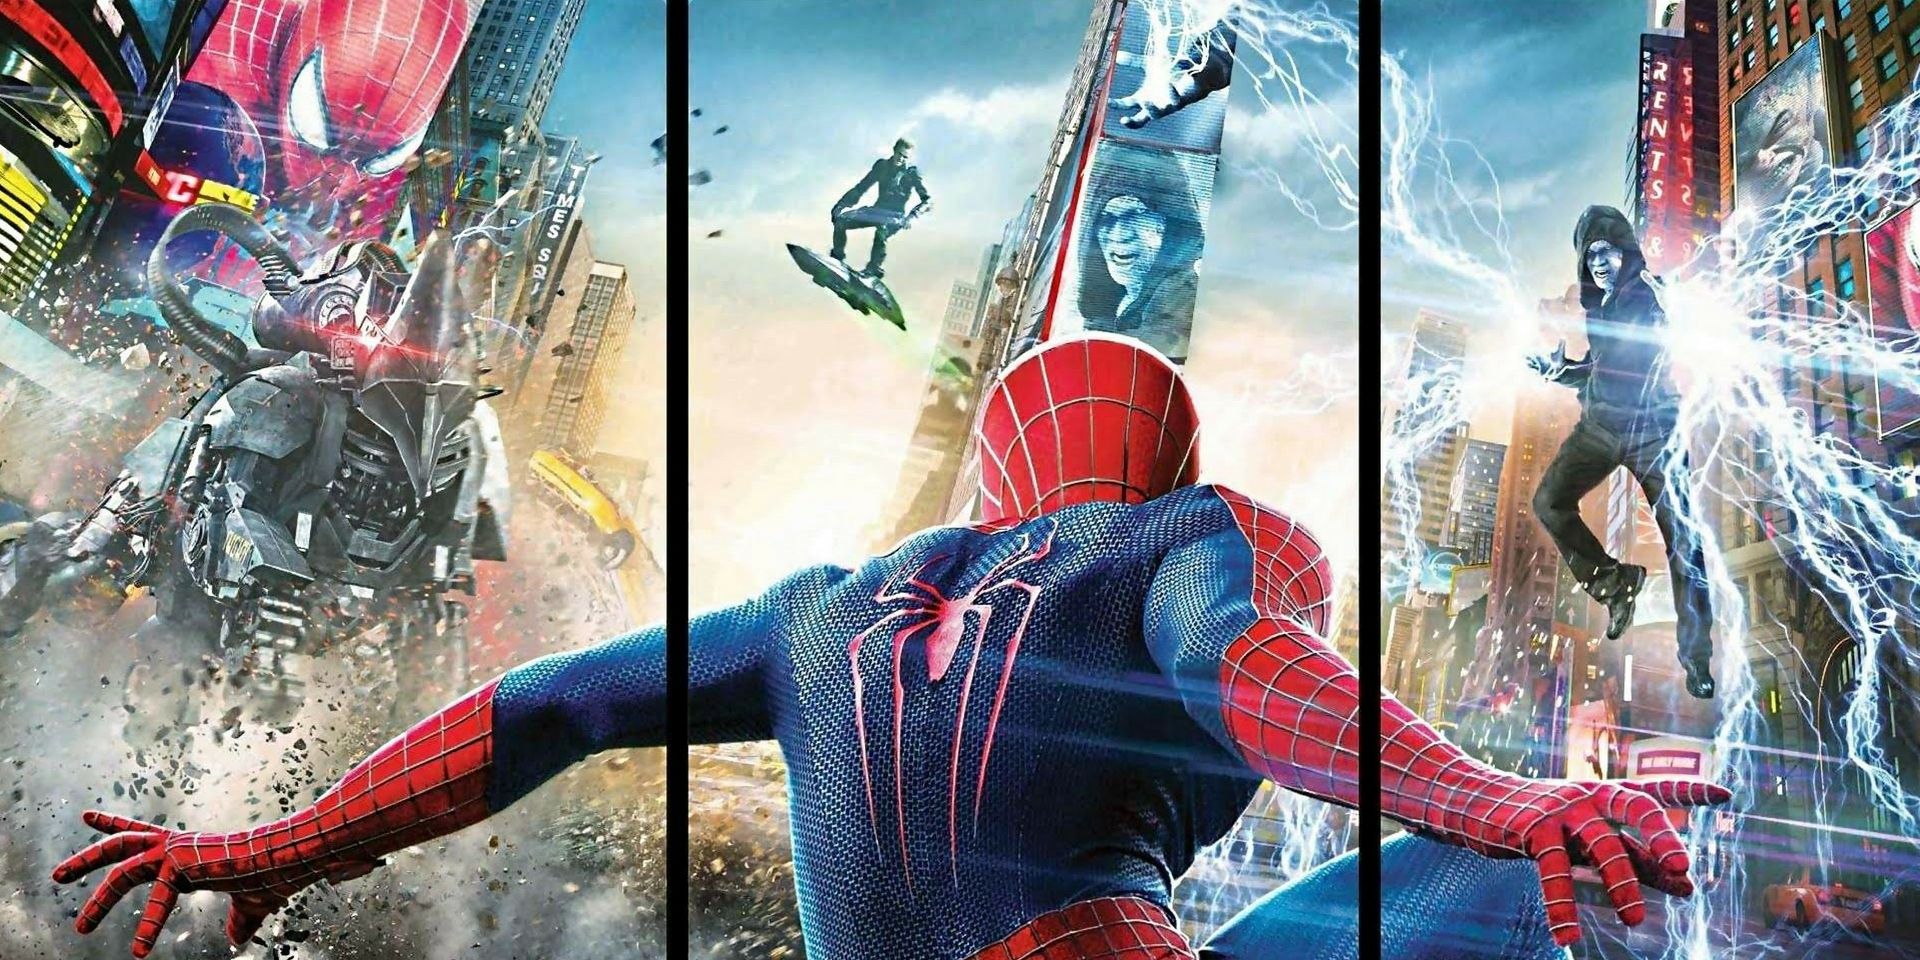 Split banner showing the villains and hero of The Amazing Spider-Man 2.